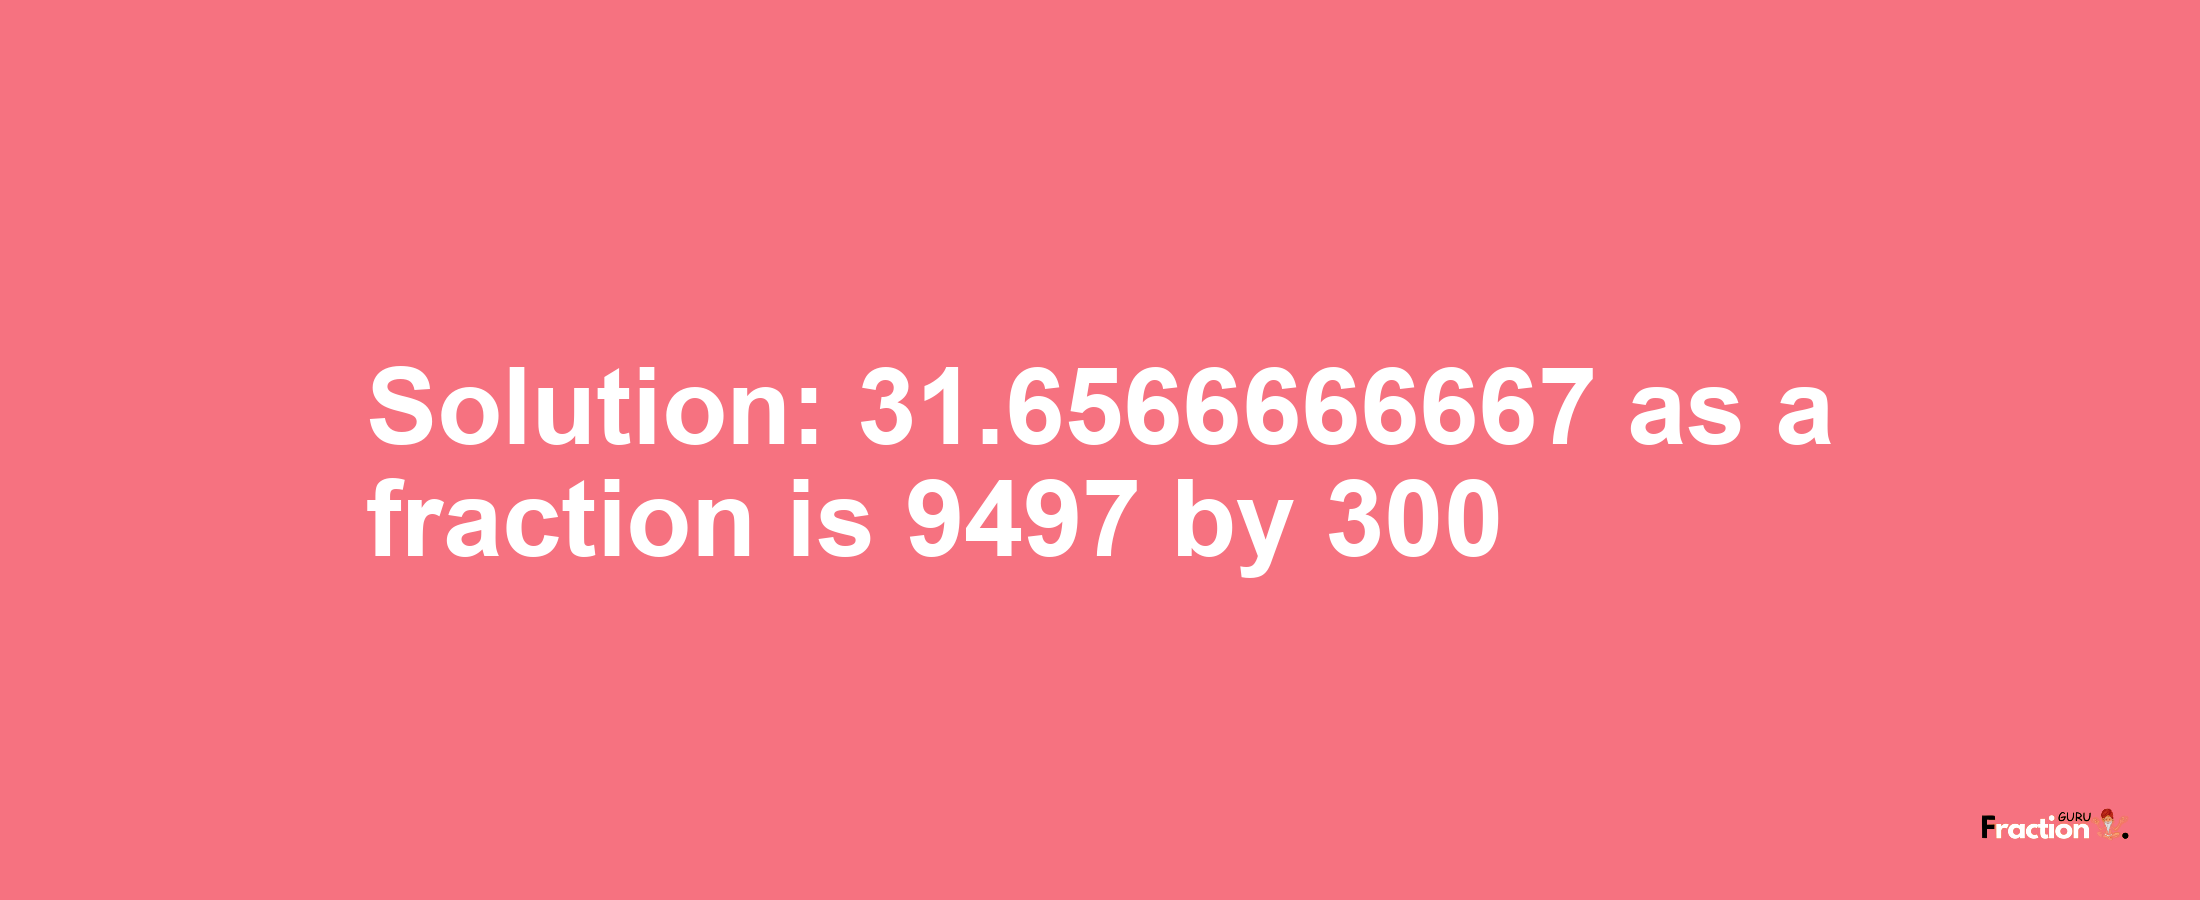 Solution:31.6566666667 as a fraction is 9497/300